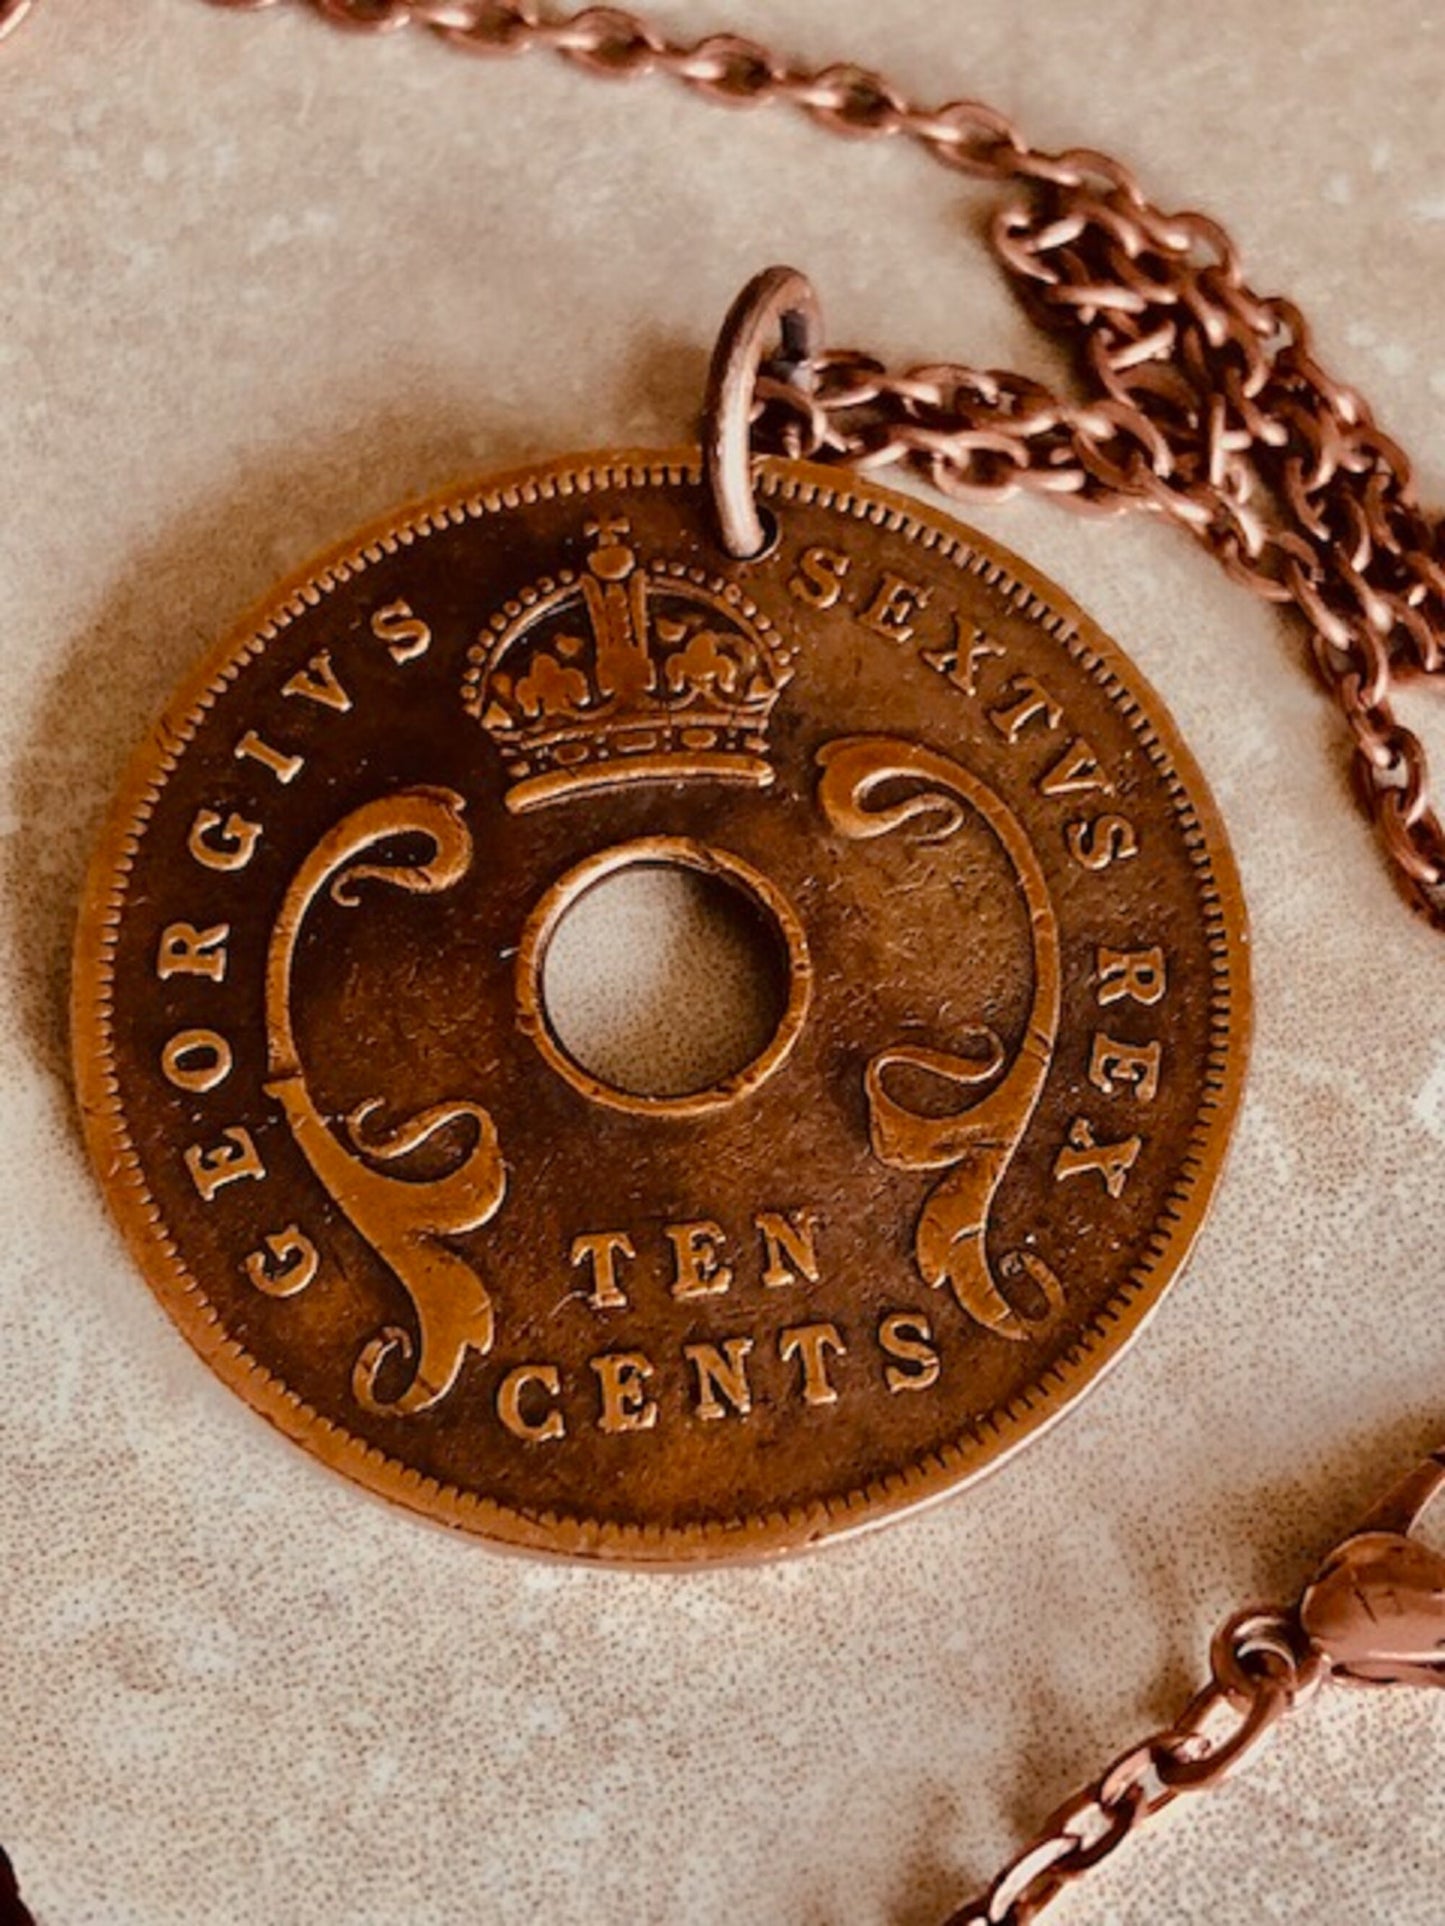 East Africa Coin Pendant 10 Cents African Personal Necklace Old Vintage Handmade Jewelry Gift Friend Charm For Him Her World Coin Collector